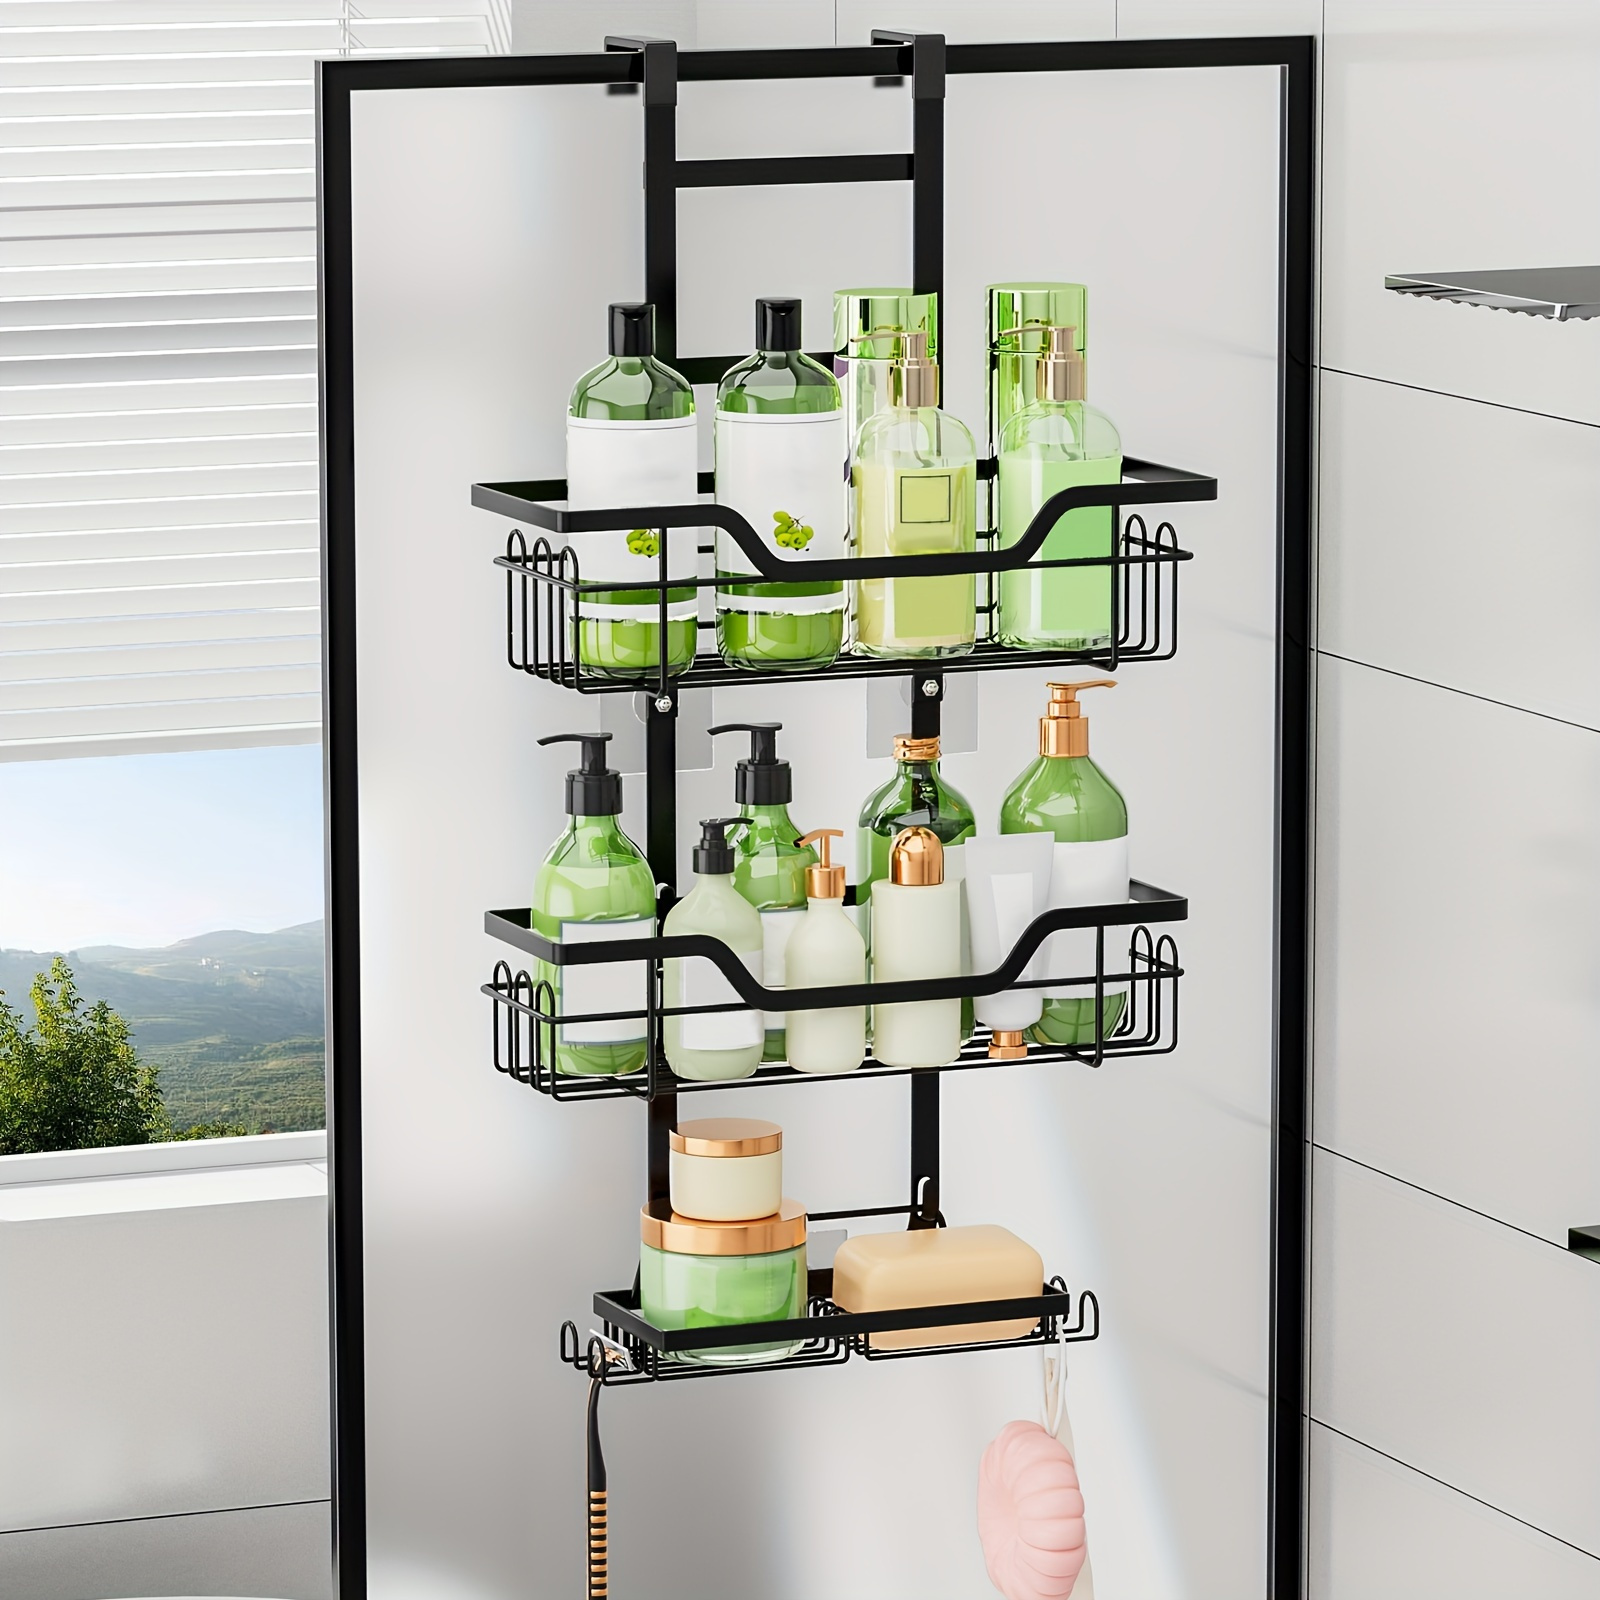 

1pc 3-tier Over-the-door Shower Caddy Rack, Rustproof Cast Iron Hanging Bathroom Organizer With Soap Holder, Space-saving Bath Accessories, Home Decor